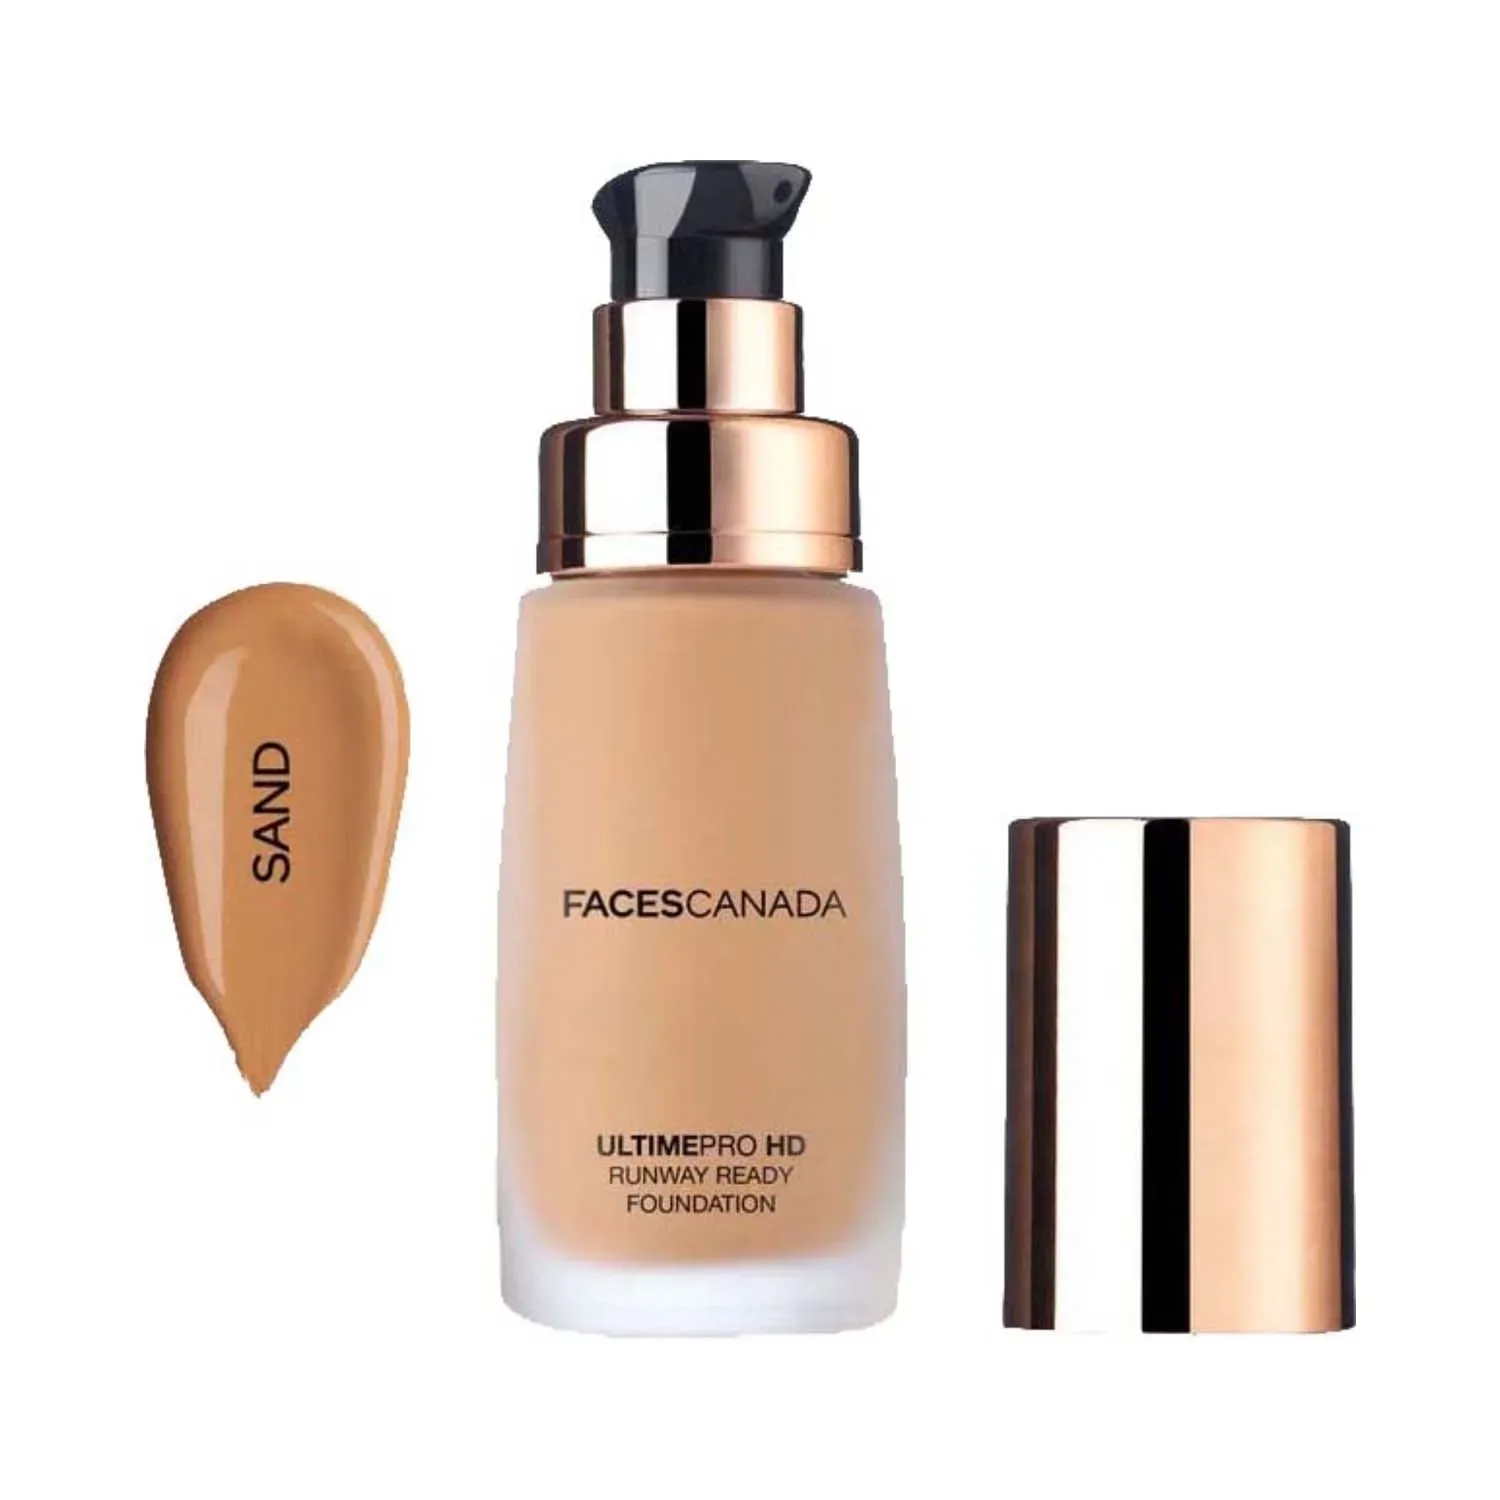 Faces Canada | Faces Canada Ultime Pro HD Runway Ready Foundation - 04 Sand (30ml)